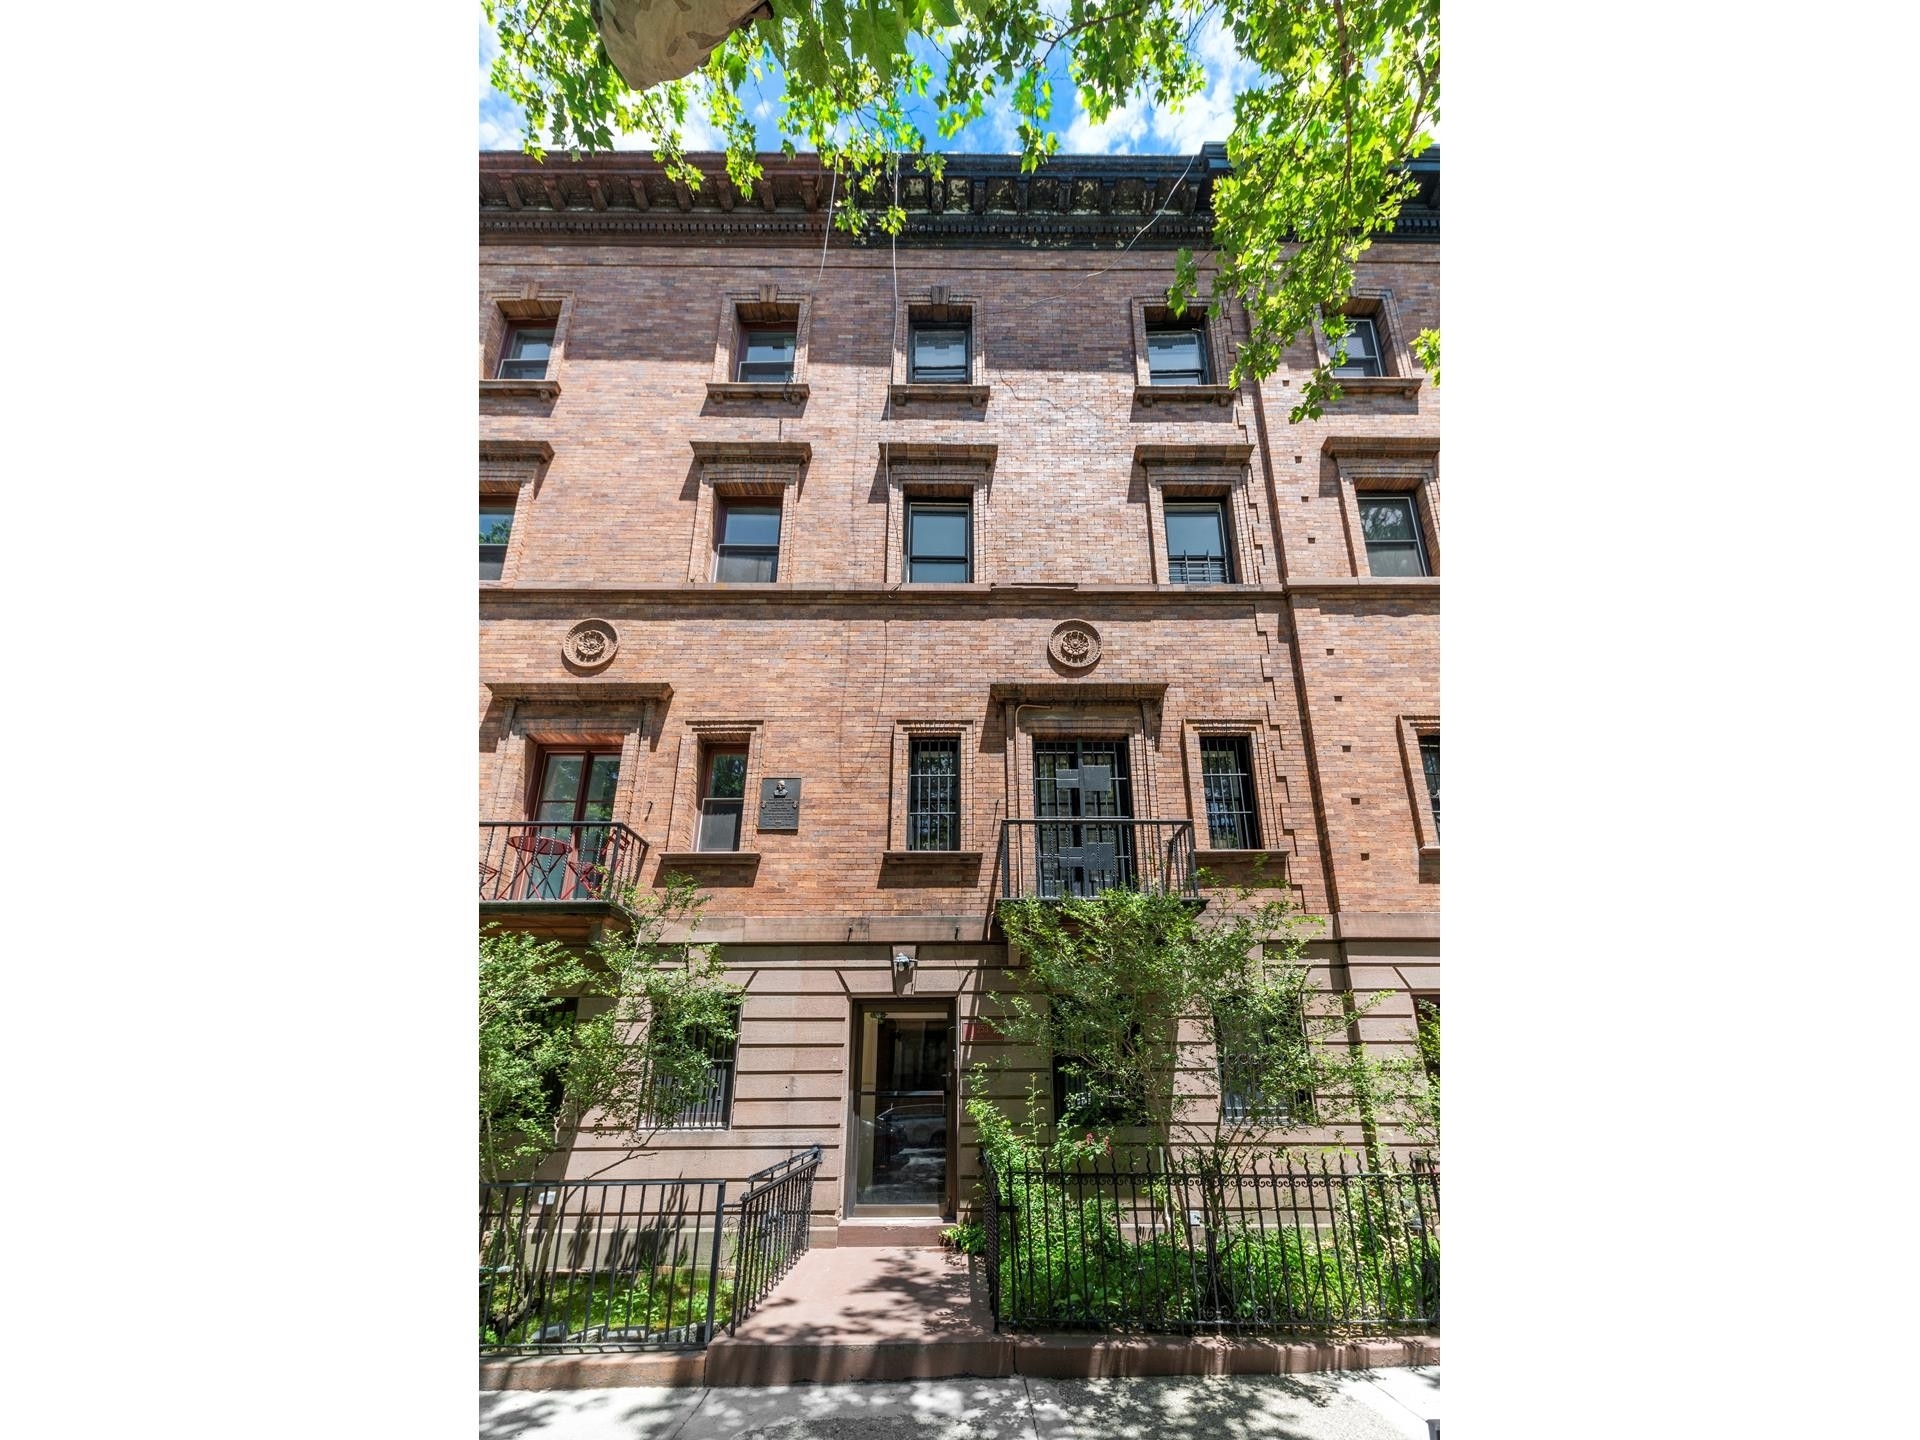 6. building at 253 West 139th St, Central Harlem, New York, NY